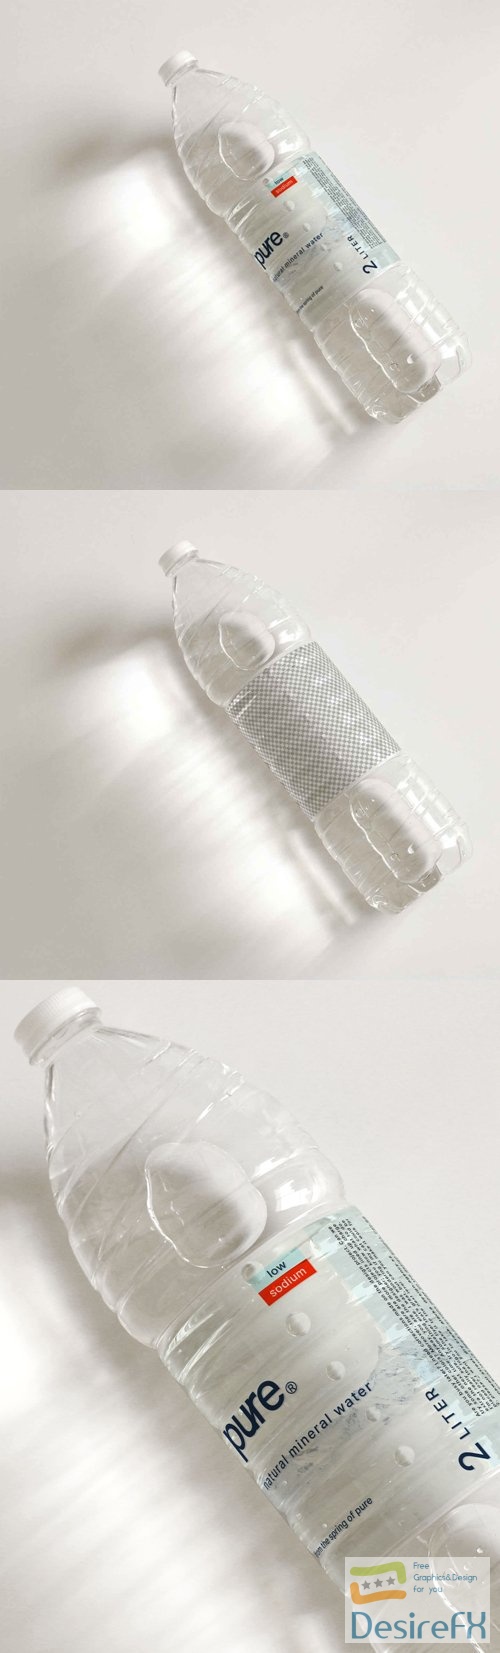 Plastic Water Bottle + Shadows &amp; Light Reflections - PSD Mockup Template